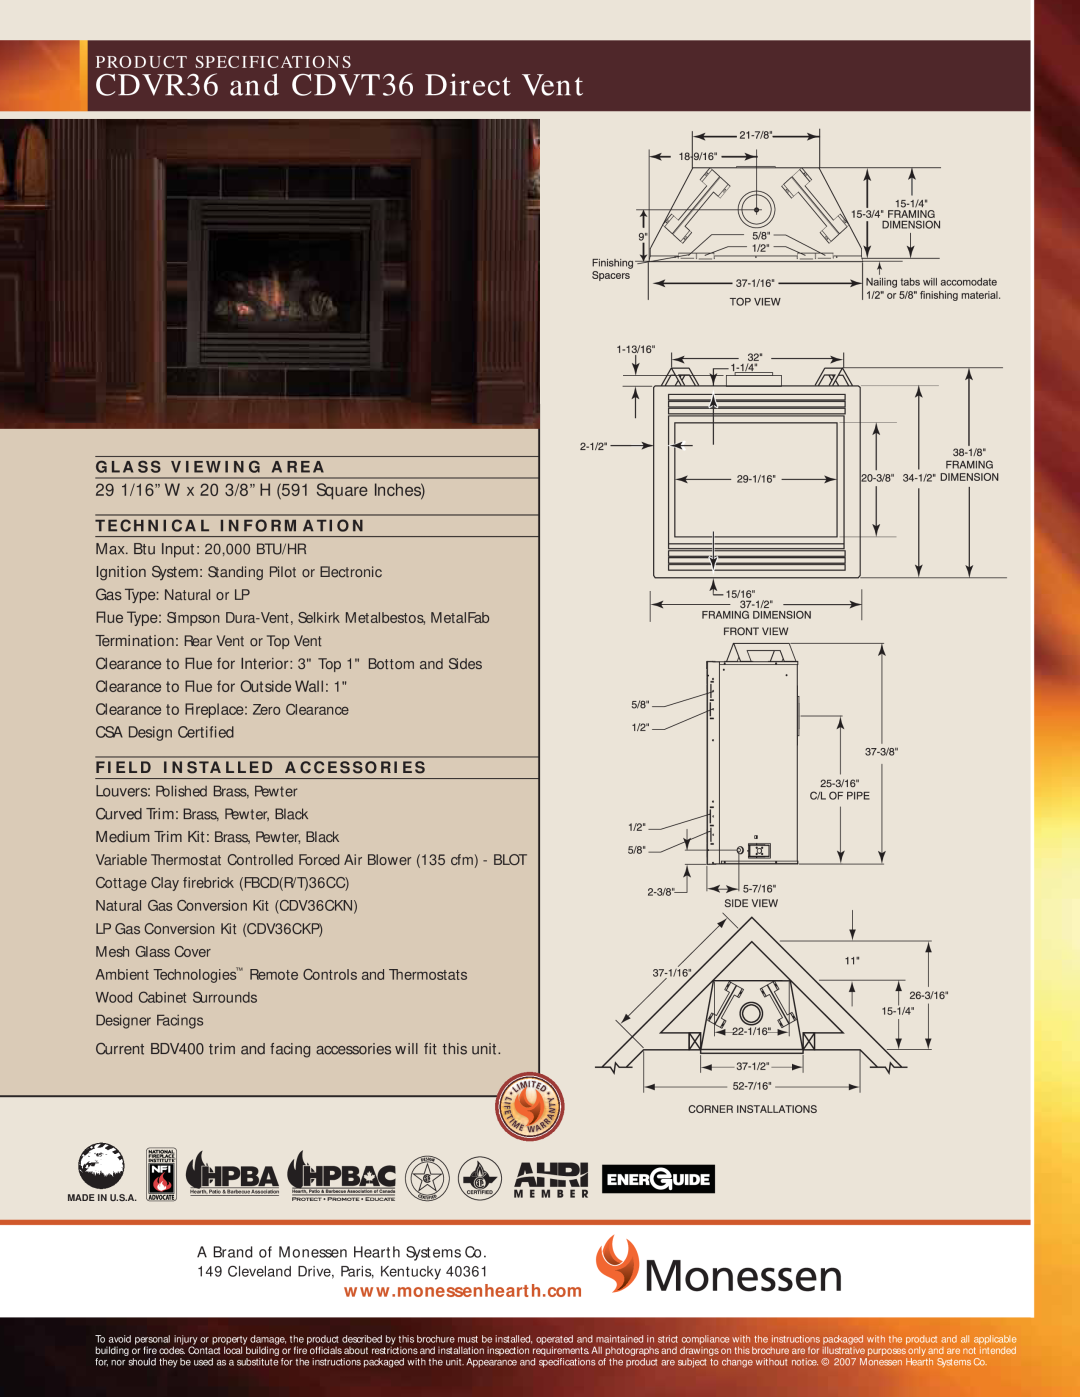 Monessen Hearth specifications CDVR36 and CDVT36 Direct Vent, Product Specifications 